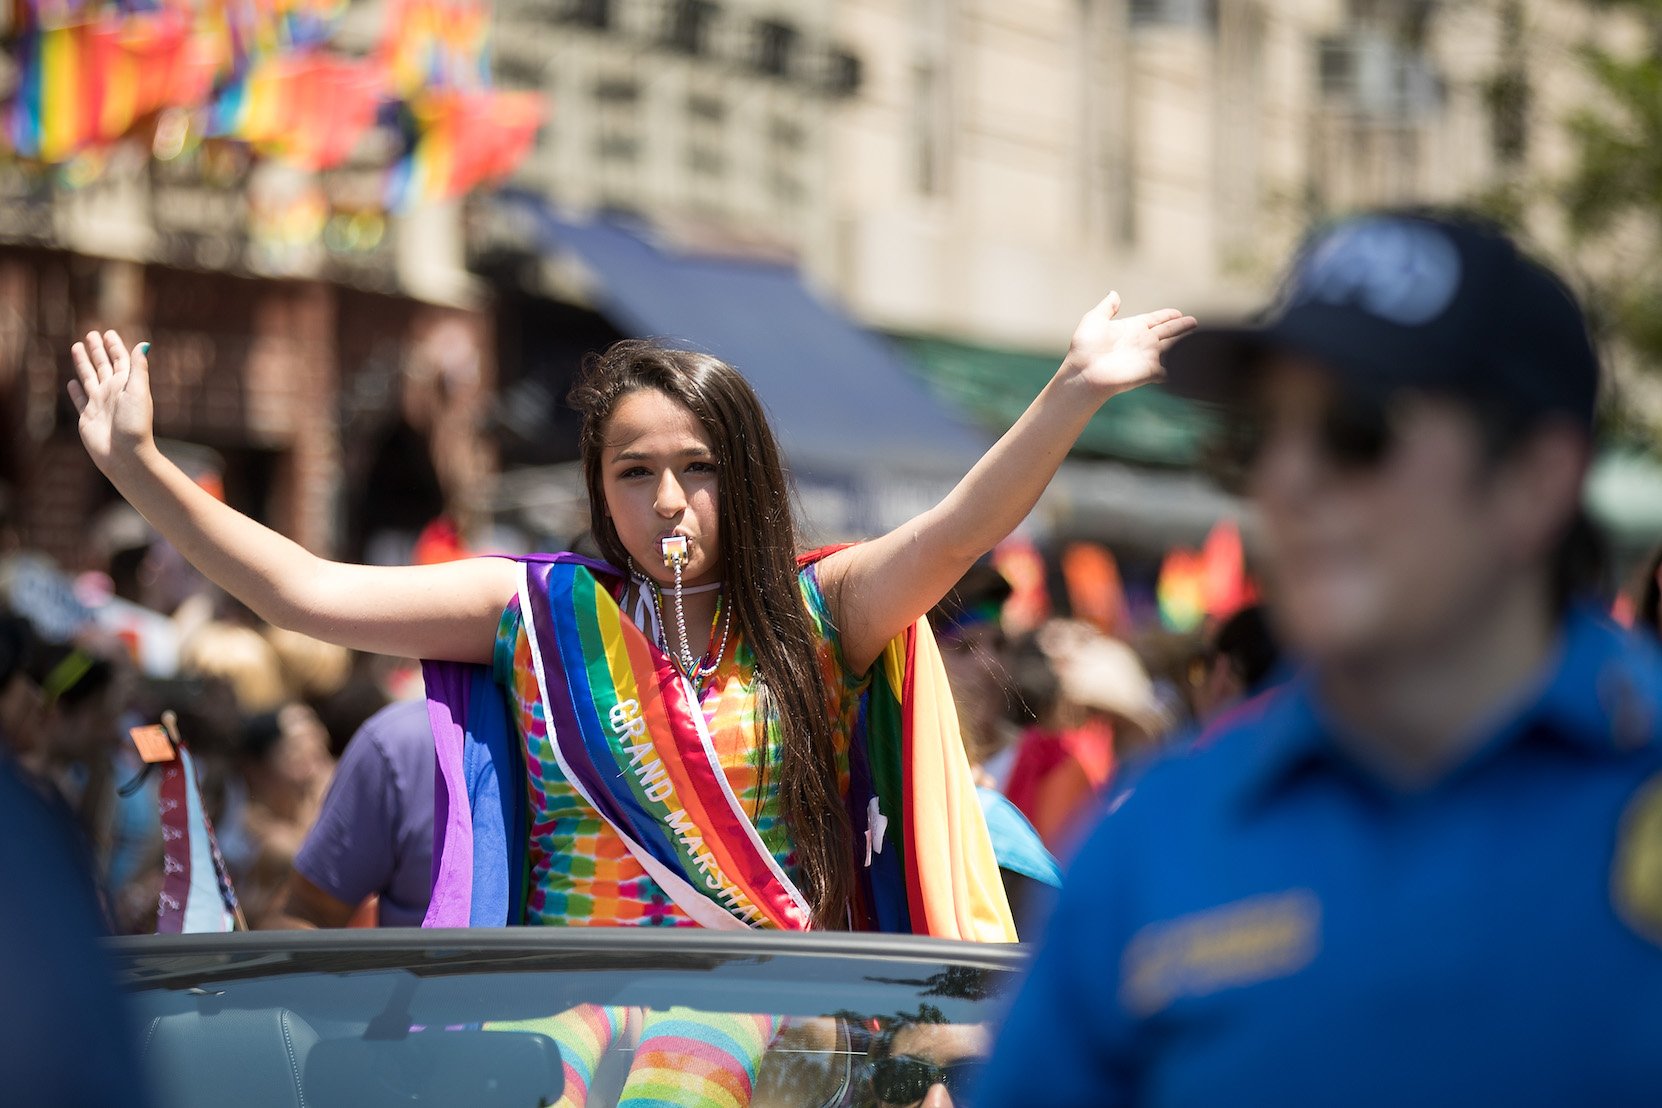 Jazz Jennings from 'I Am Jazz' Season 8 in a rainbow outfit riding in a the back of a convertible through a parade